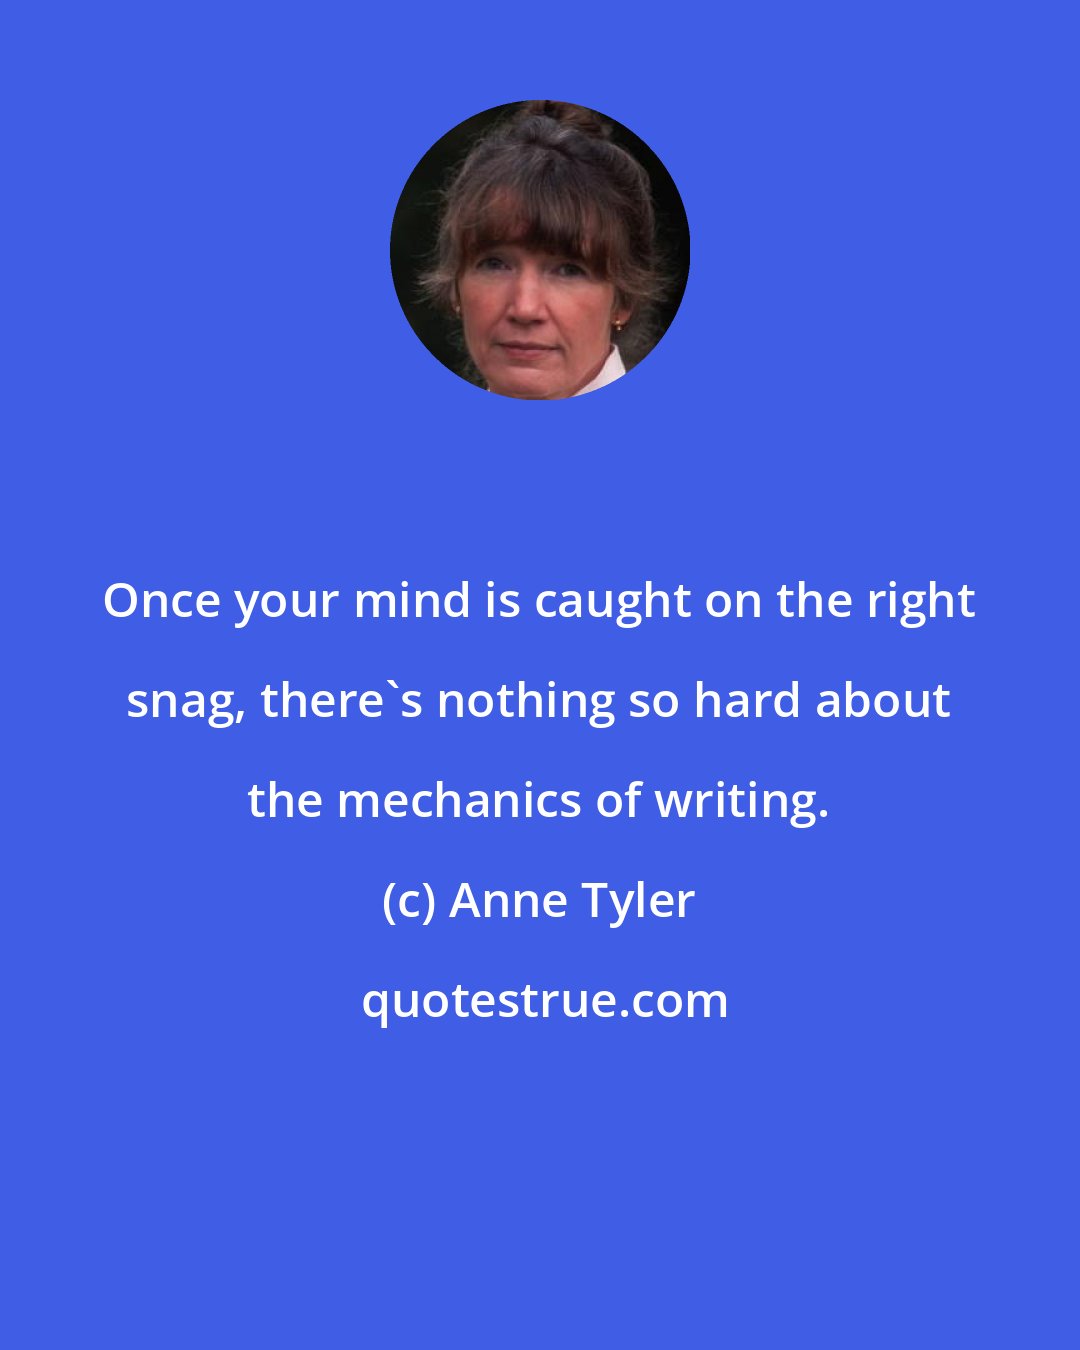 Anne Tyler: Once your mind is caught on the right snag, there's nothing so hard about the mechanics of writing.